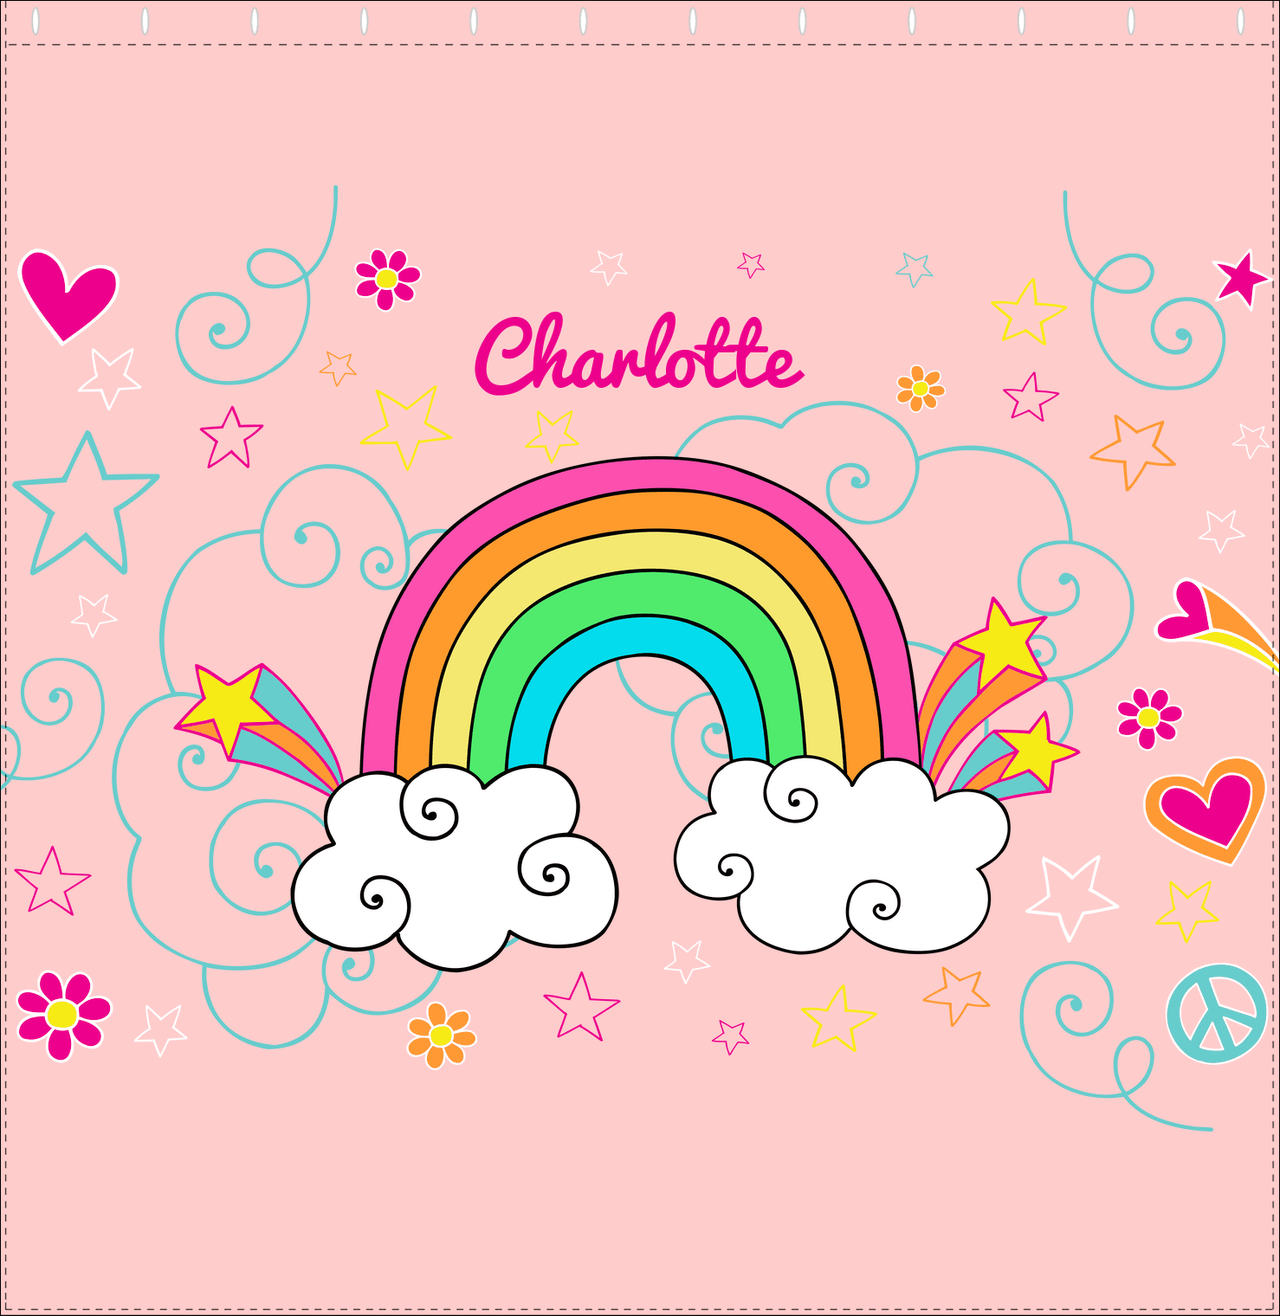 Personalized Rainbows Shower Curtain VI - Rainbow Doodle - Pink Background - Decorate View